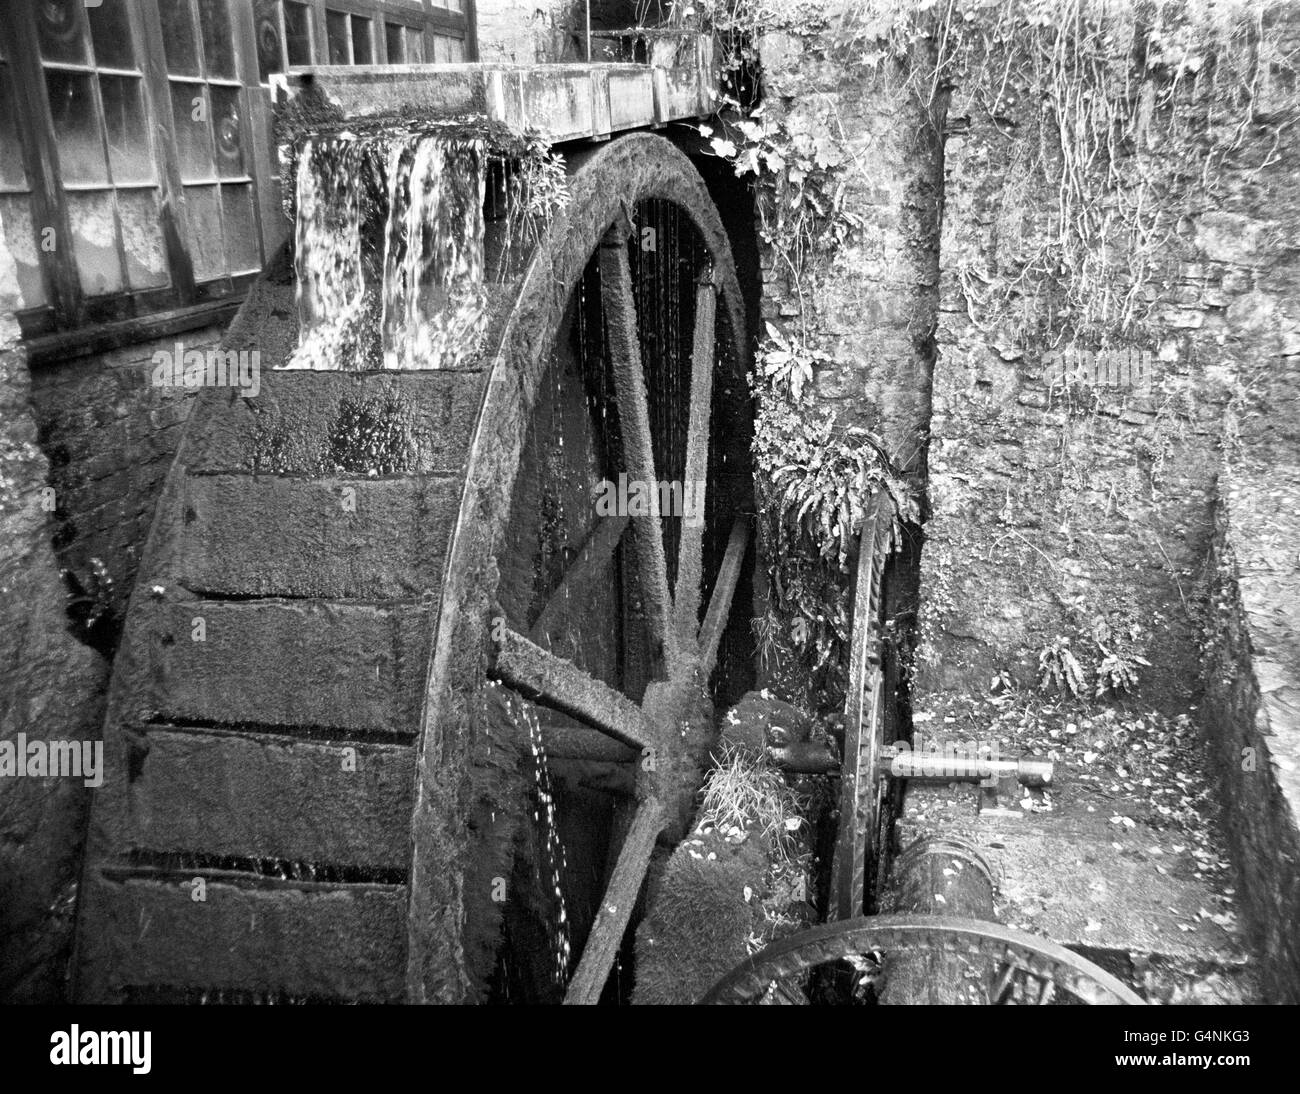 An eleventh century Water-Mill, fed by a duck pond from above, in the village of Cockington, Torbay, Devon. Stock Photo